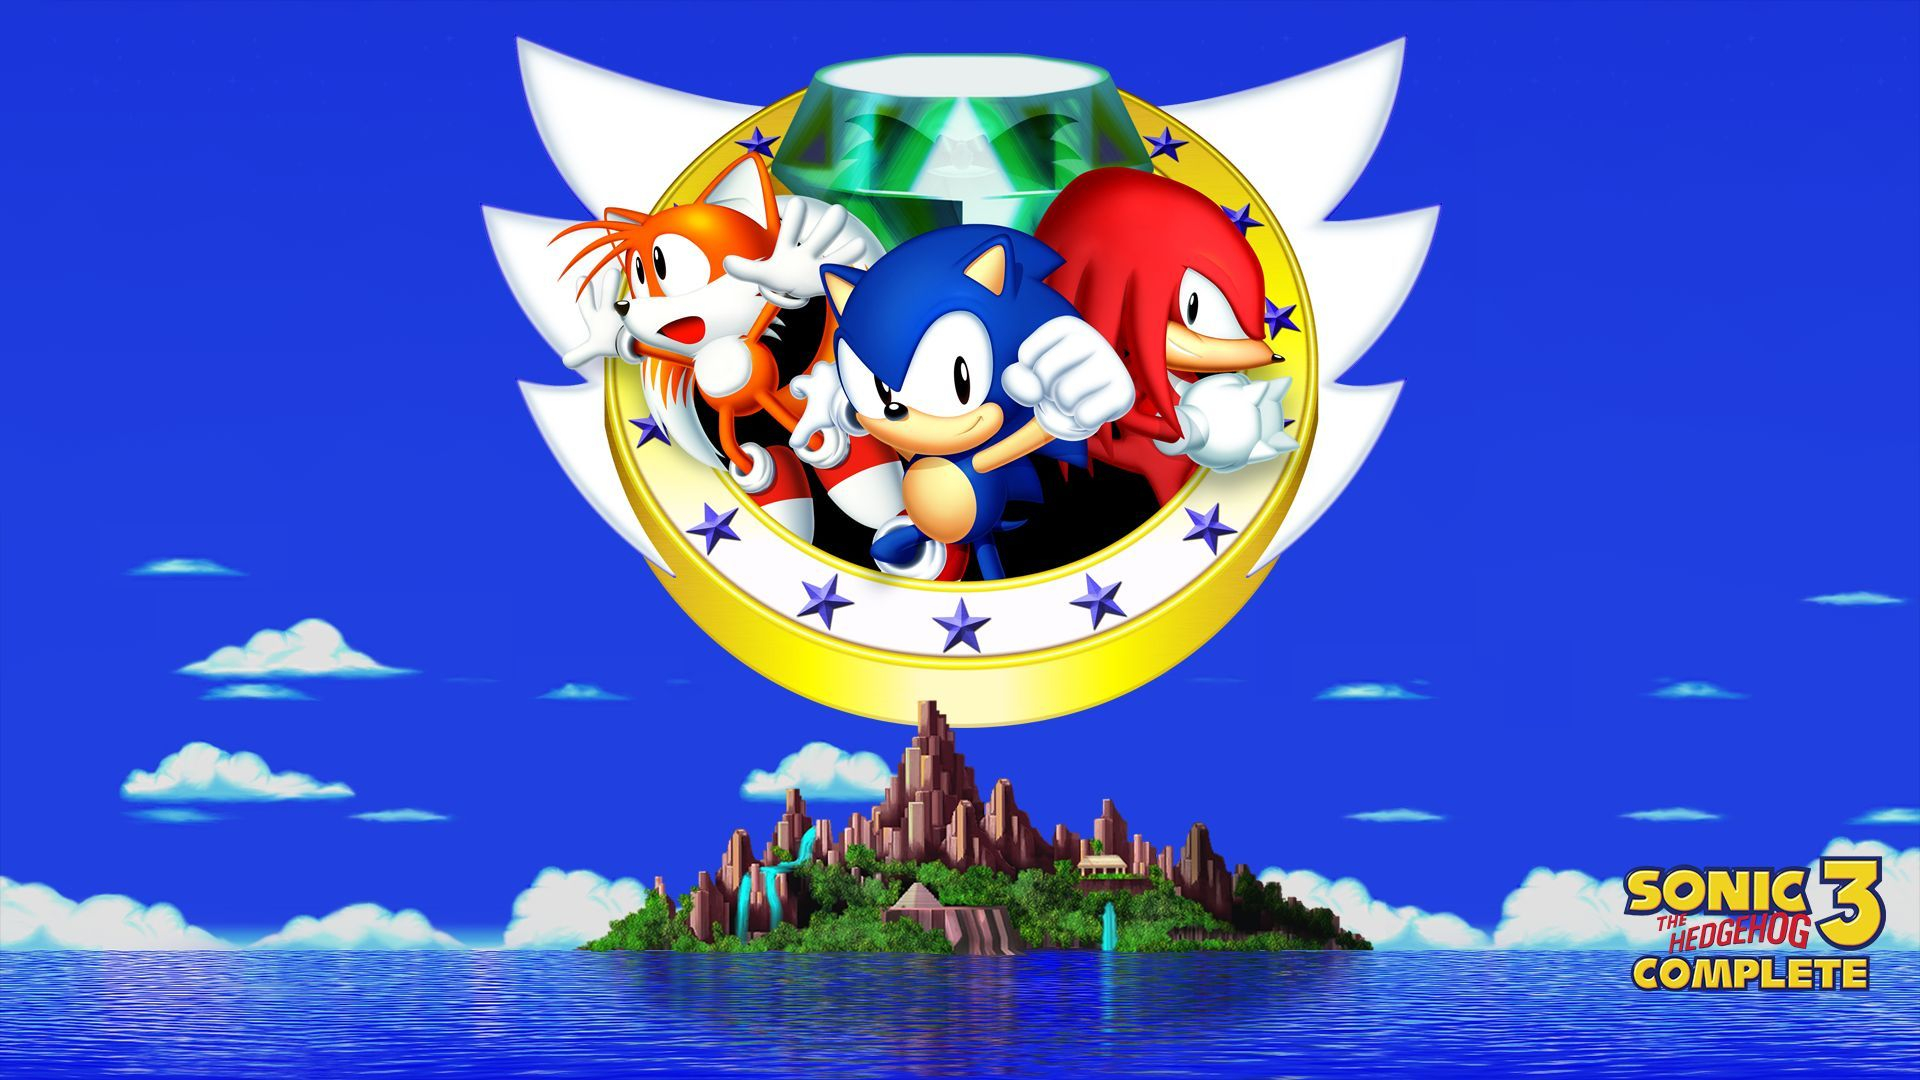 1920x1080 Sonic The Hedgehog Backgrounds High Quality | Wallpapers ... | Sonic the hedgehog, Sonic, Classic sonic